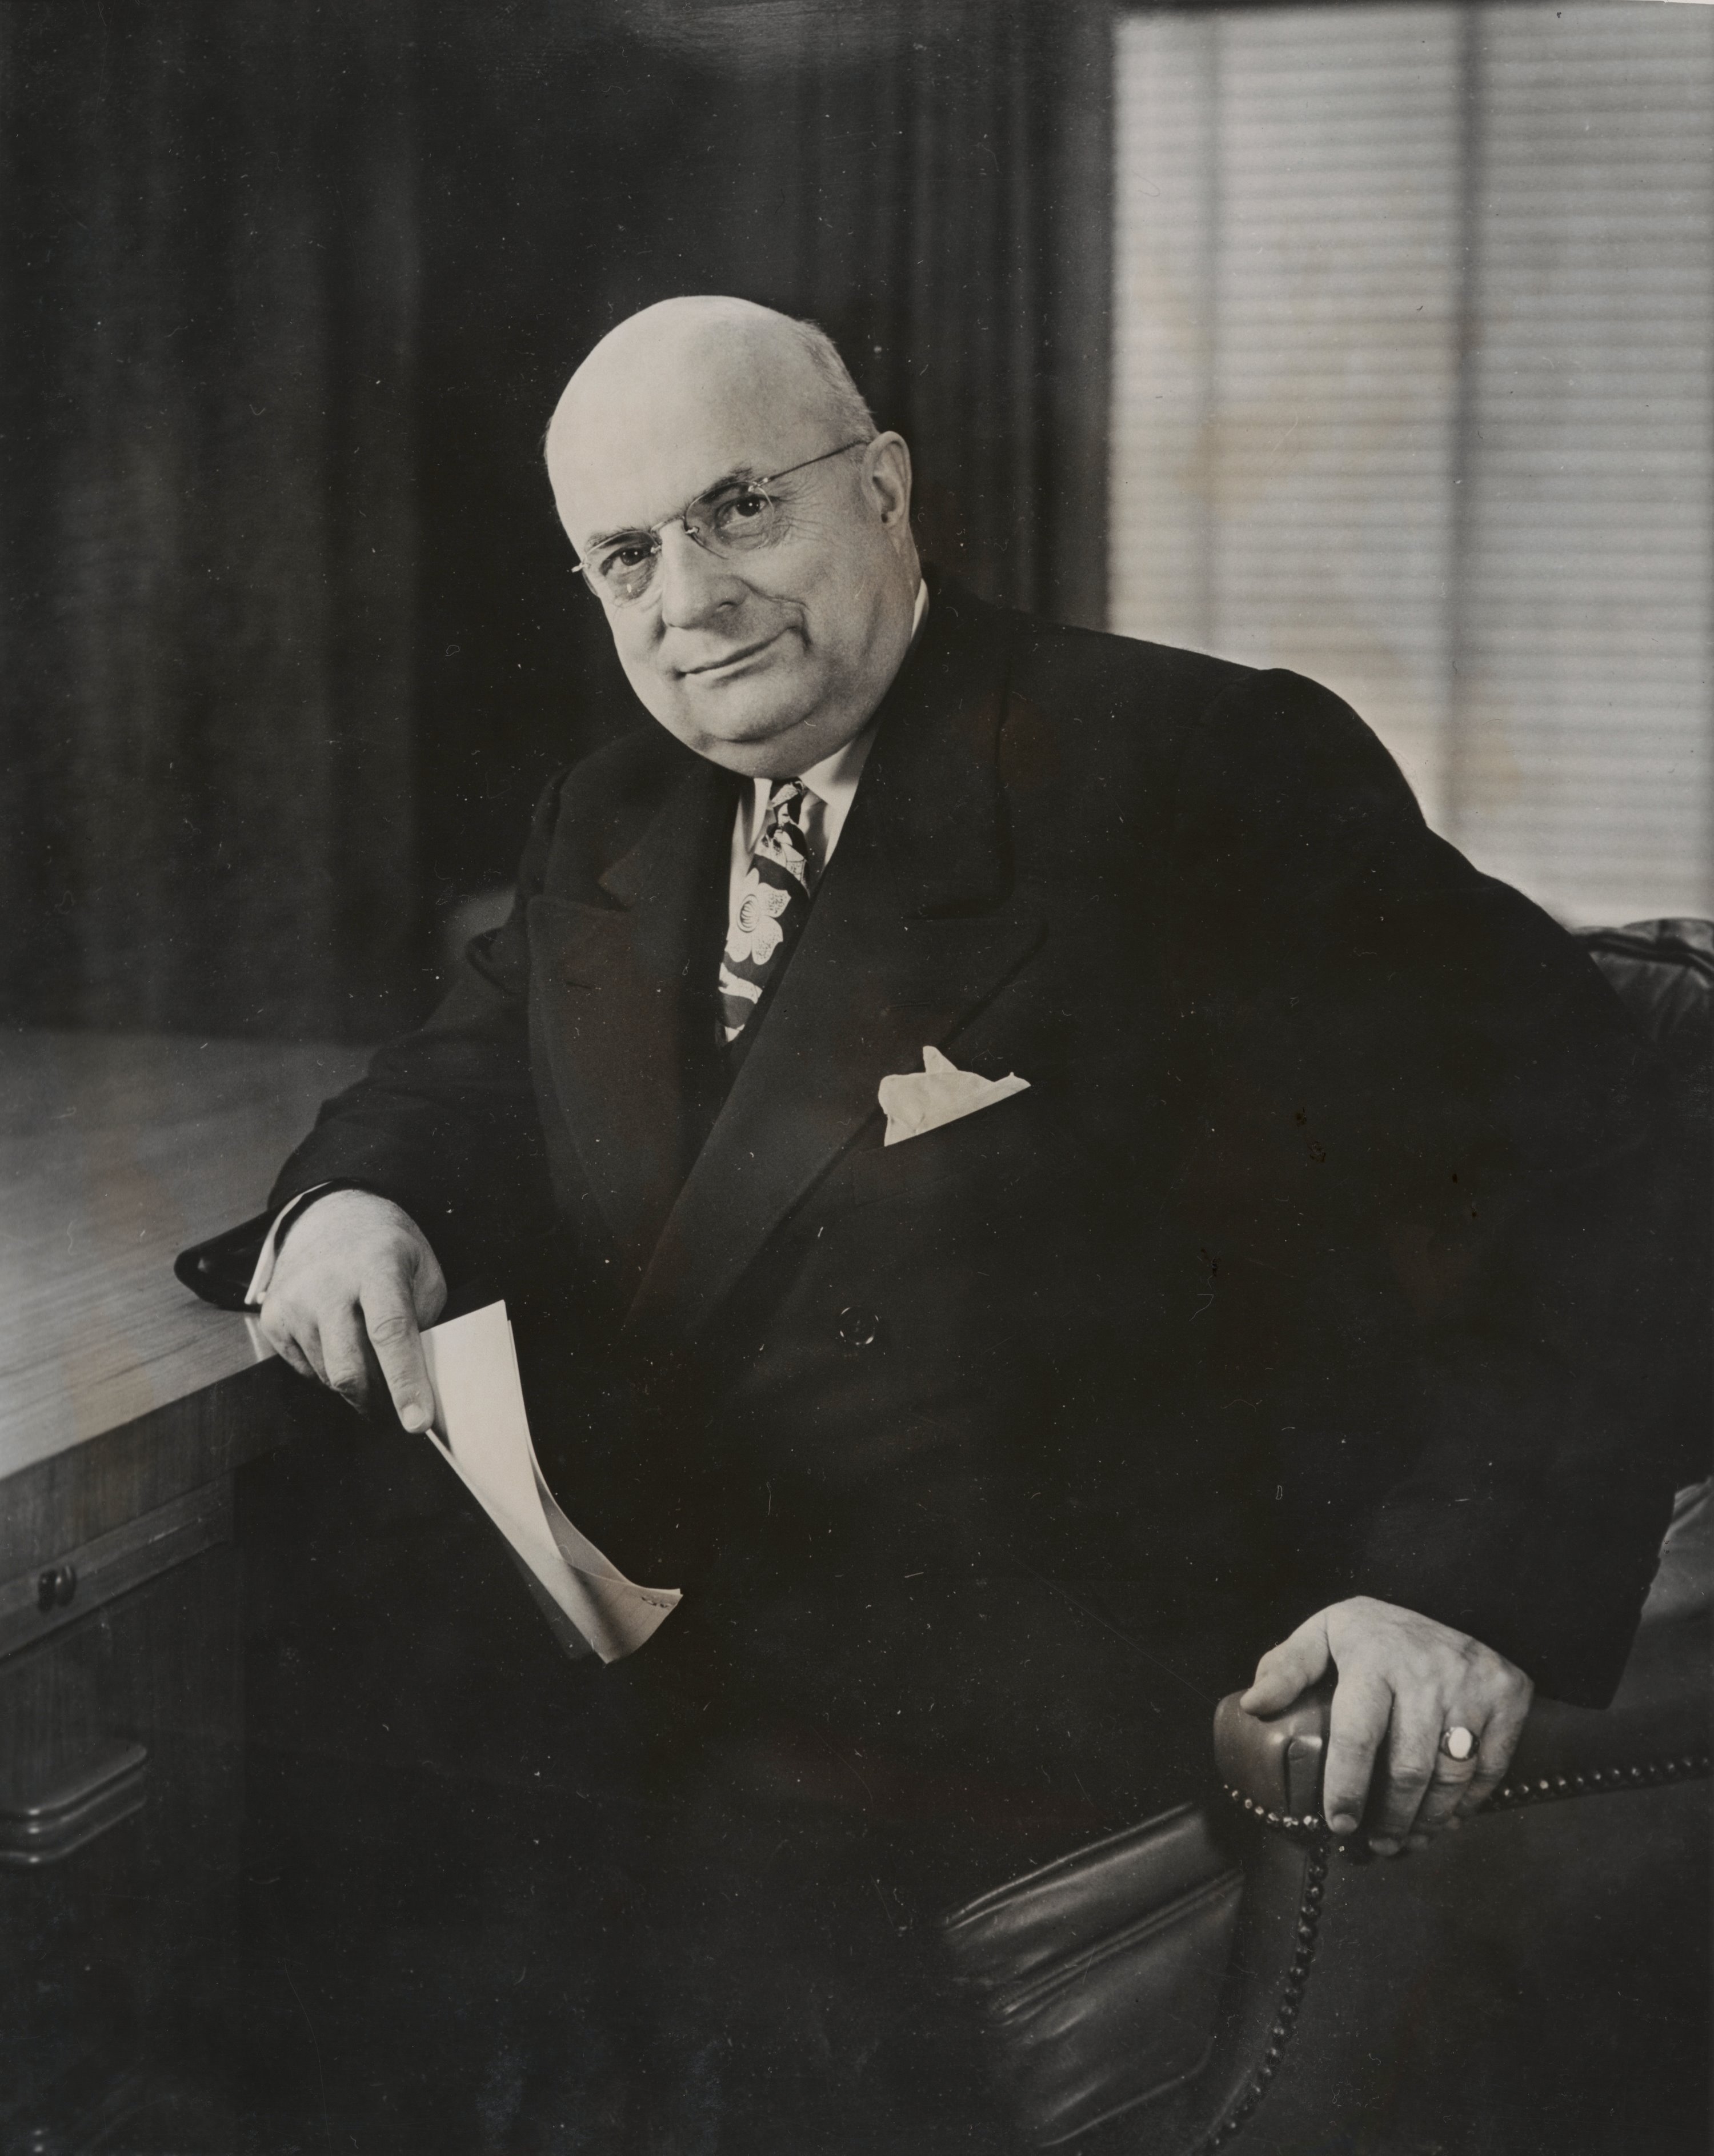 Henry J. Kaiser leans against a desk with papers in hand wearing a suit.